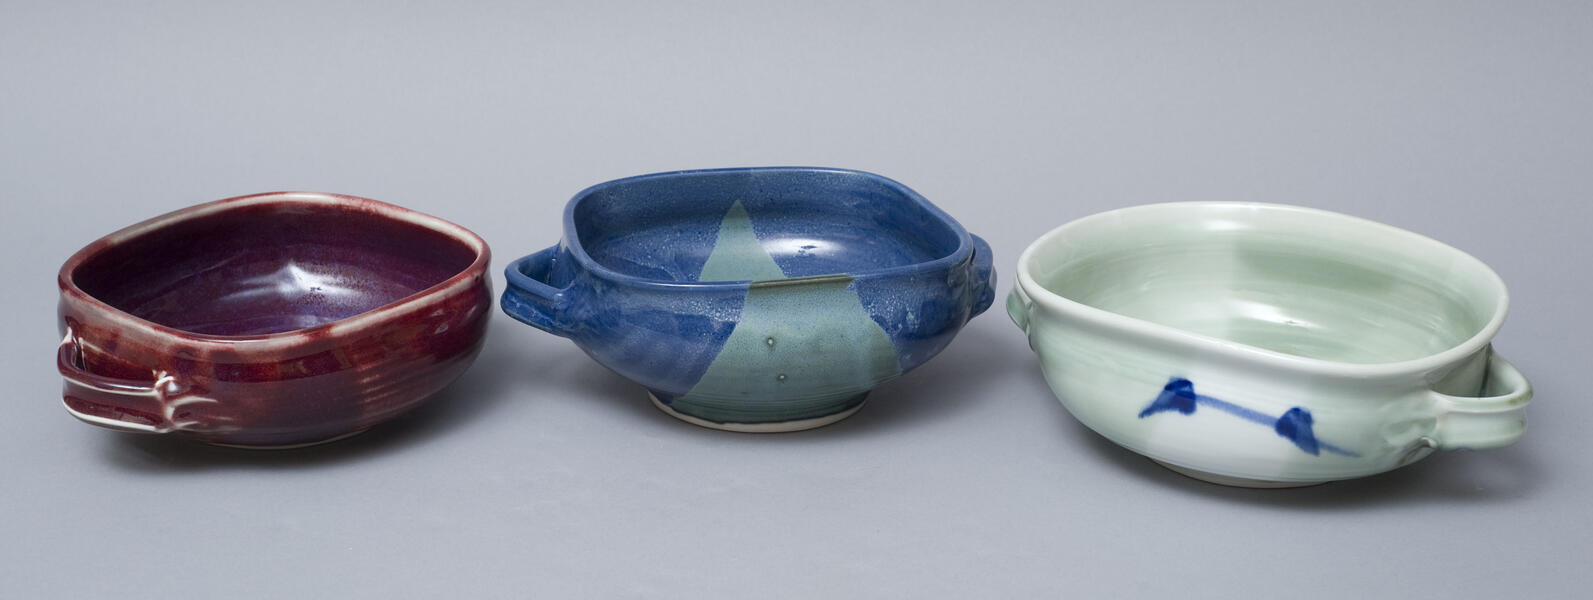 Serving bowls with handles